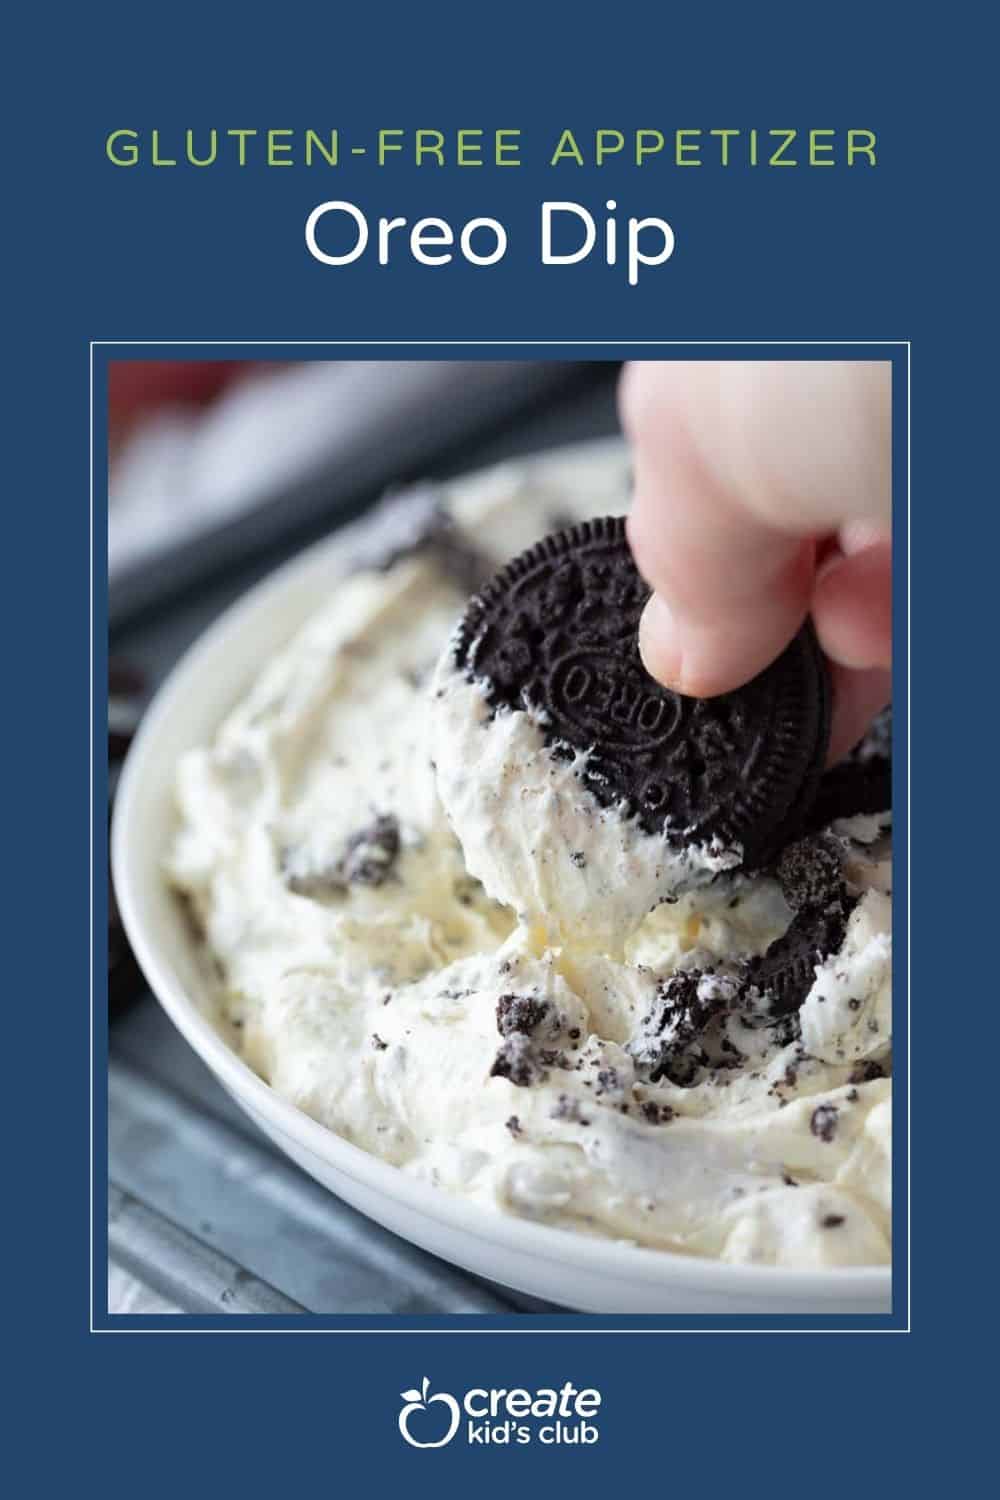 A pin of Oreo dip with a Oreo taking some dip from a bowl.